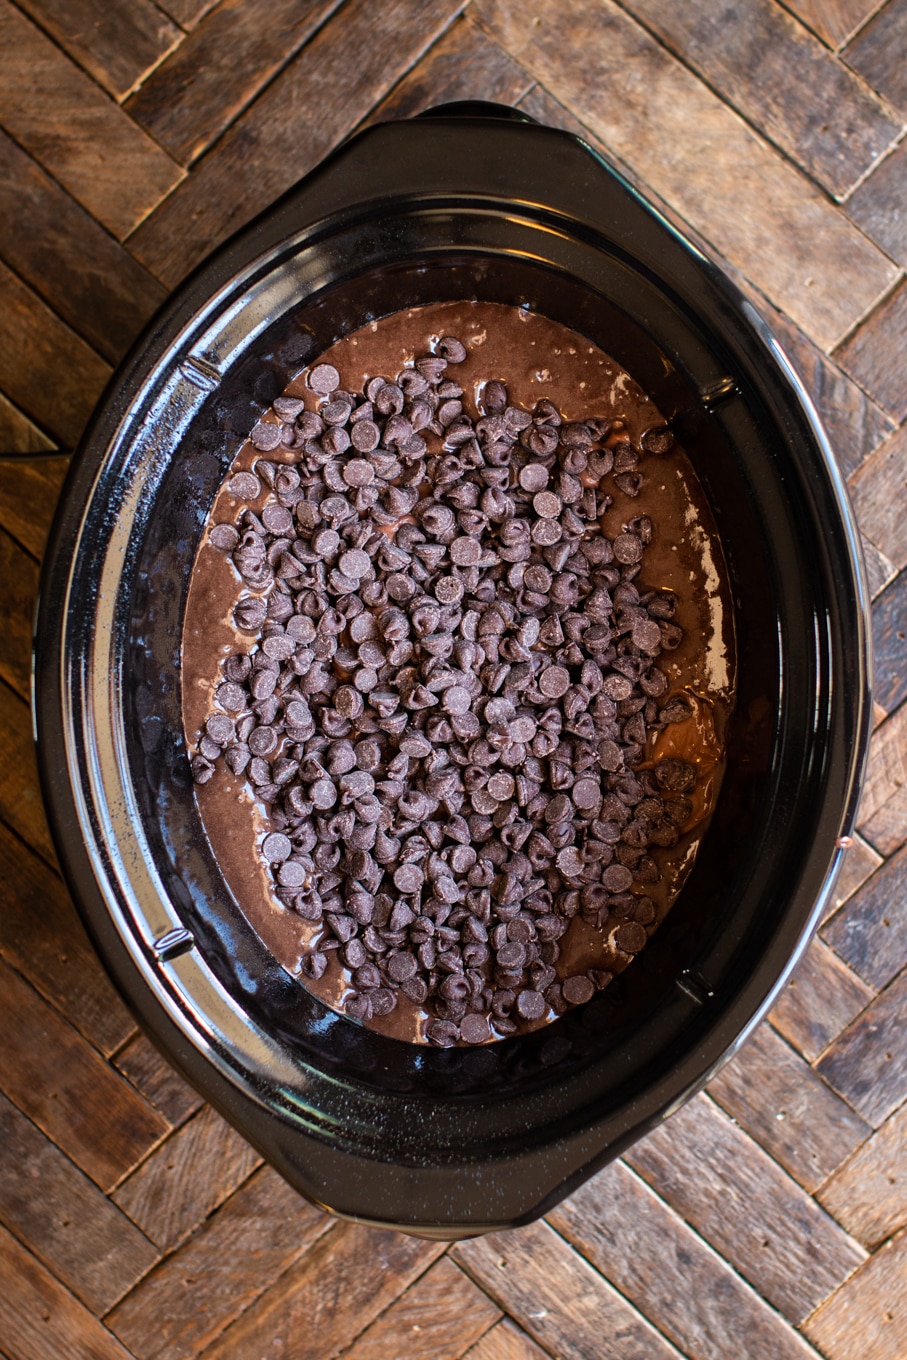 cake batter, pudding and chocolate chips, uncooked in a slow cooker.